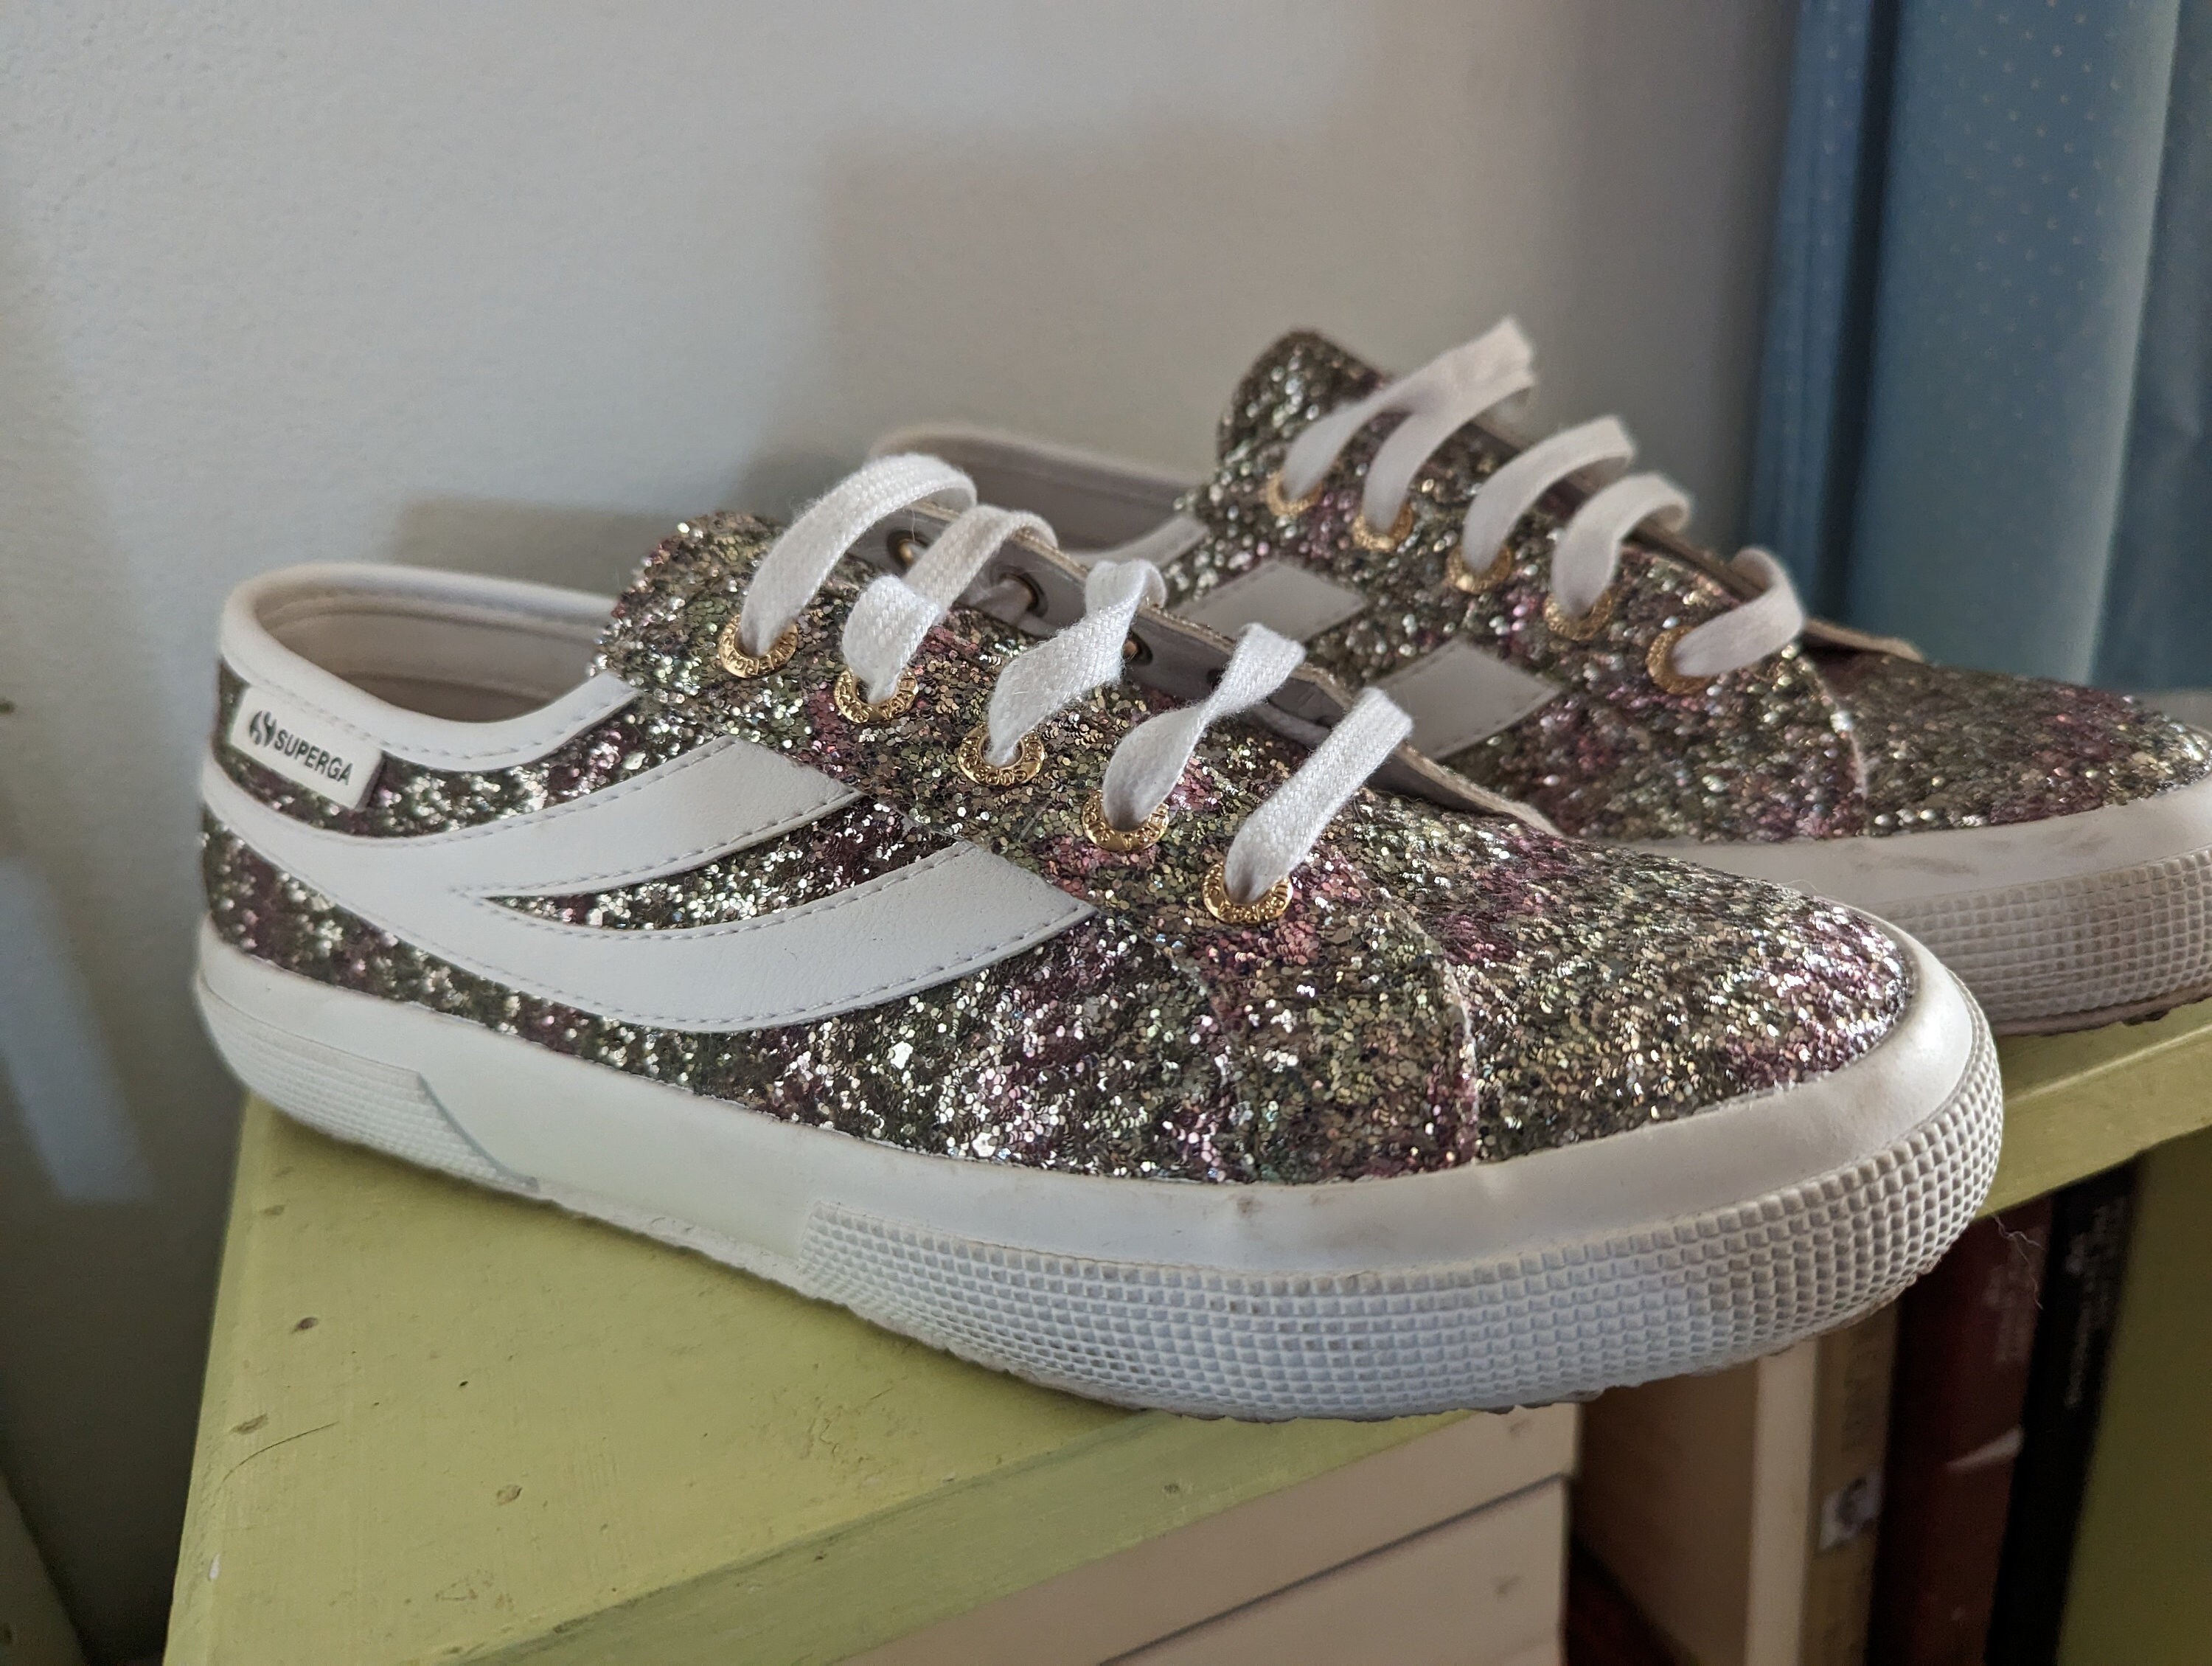 Sparkle Sneakers Women, Silver Sequin Canvas Sneakers, Wedding